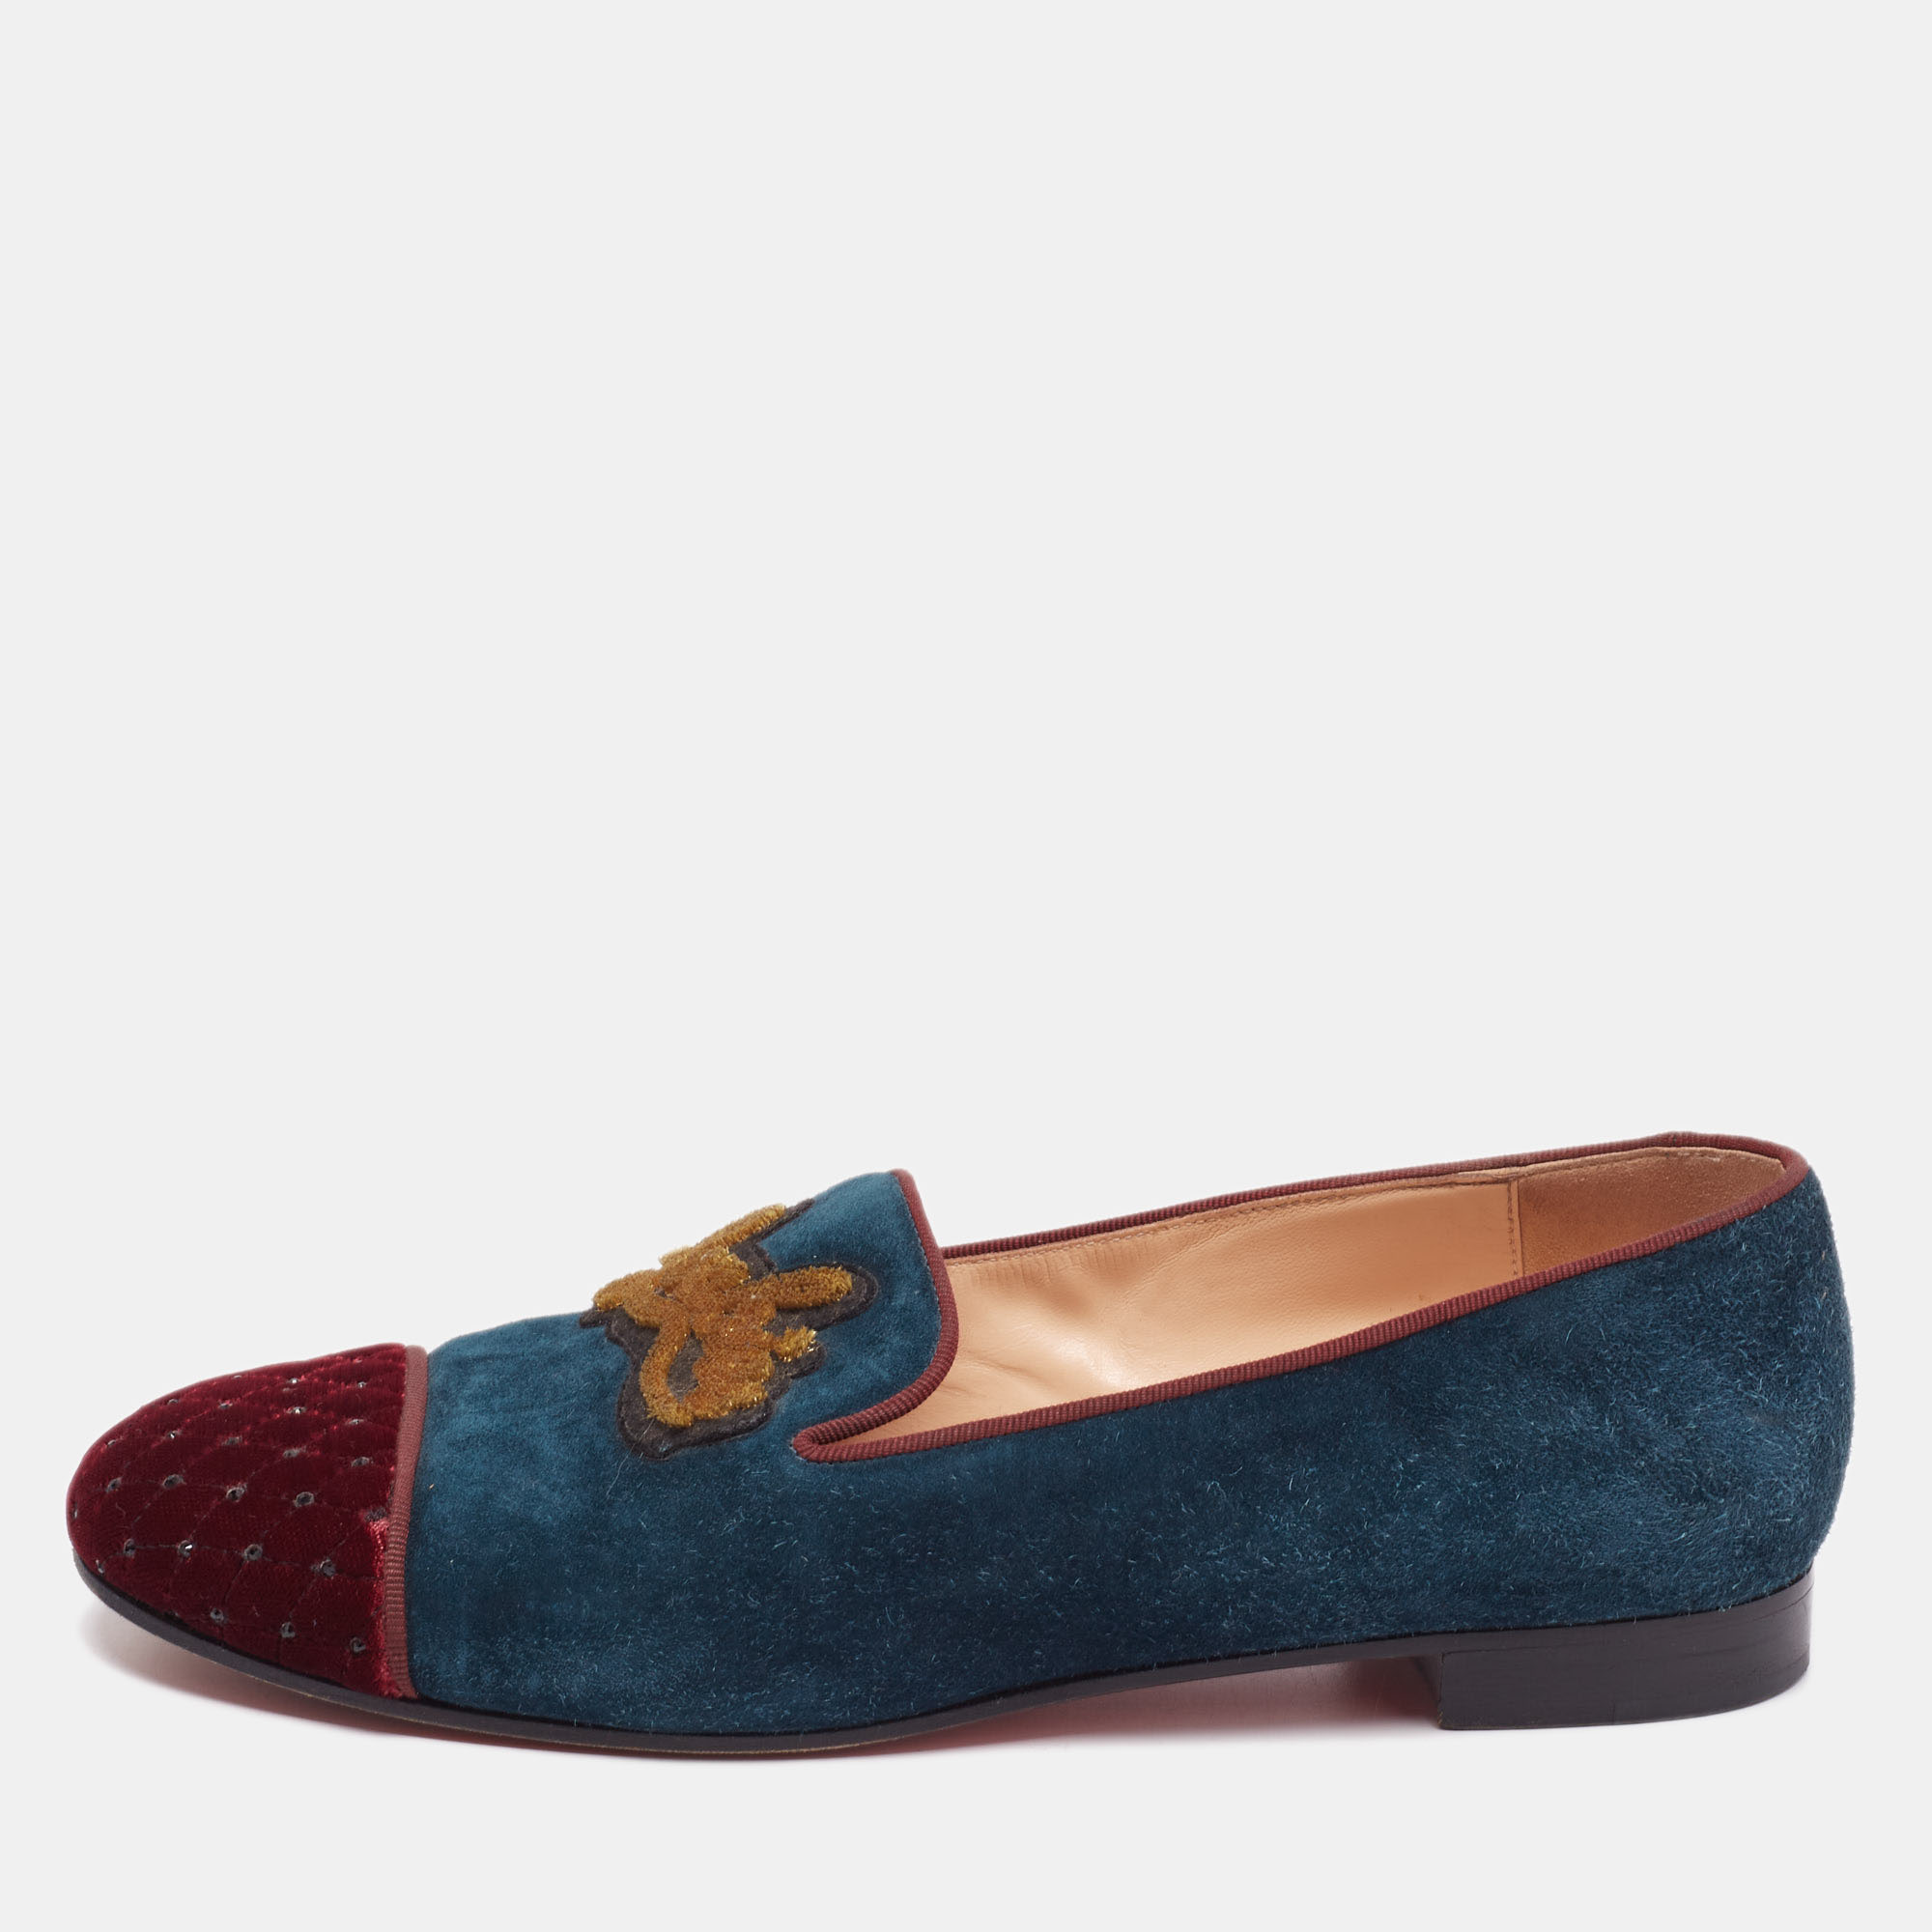 Christian Louboutin Tricolor Suede And Velvet I Love My Loubies Loafers Size 38.5